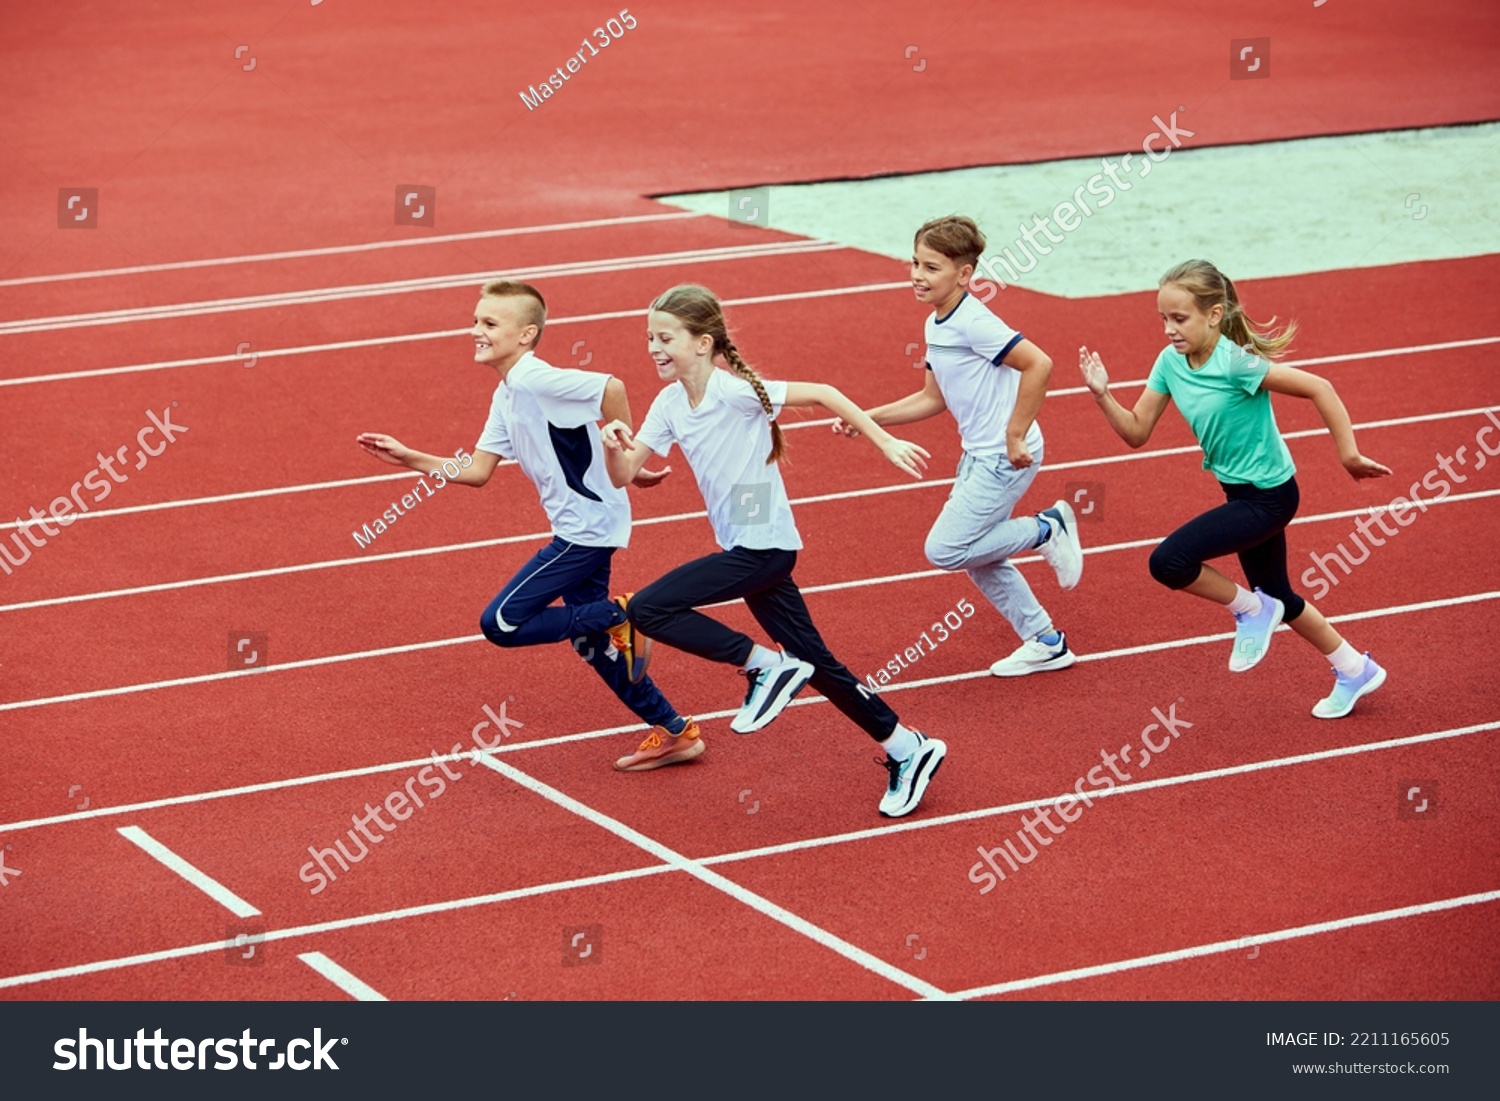 Group of children running on treadmill at the stadium or arena. Little fit boys and girls in sportswear training as athletes outdoor. Concept of sport, fitness, achievements, studying, goals, skills #2211165605